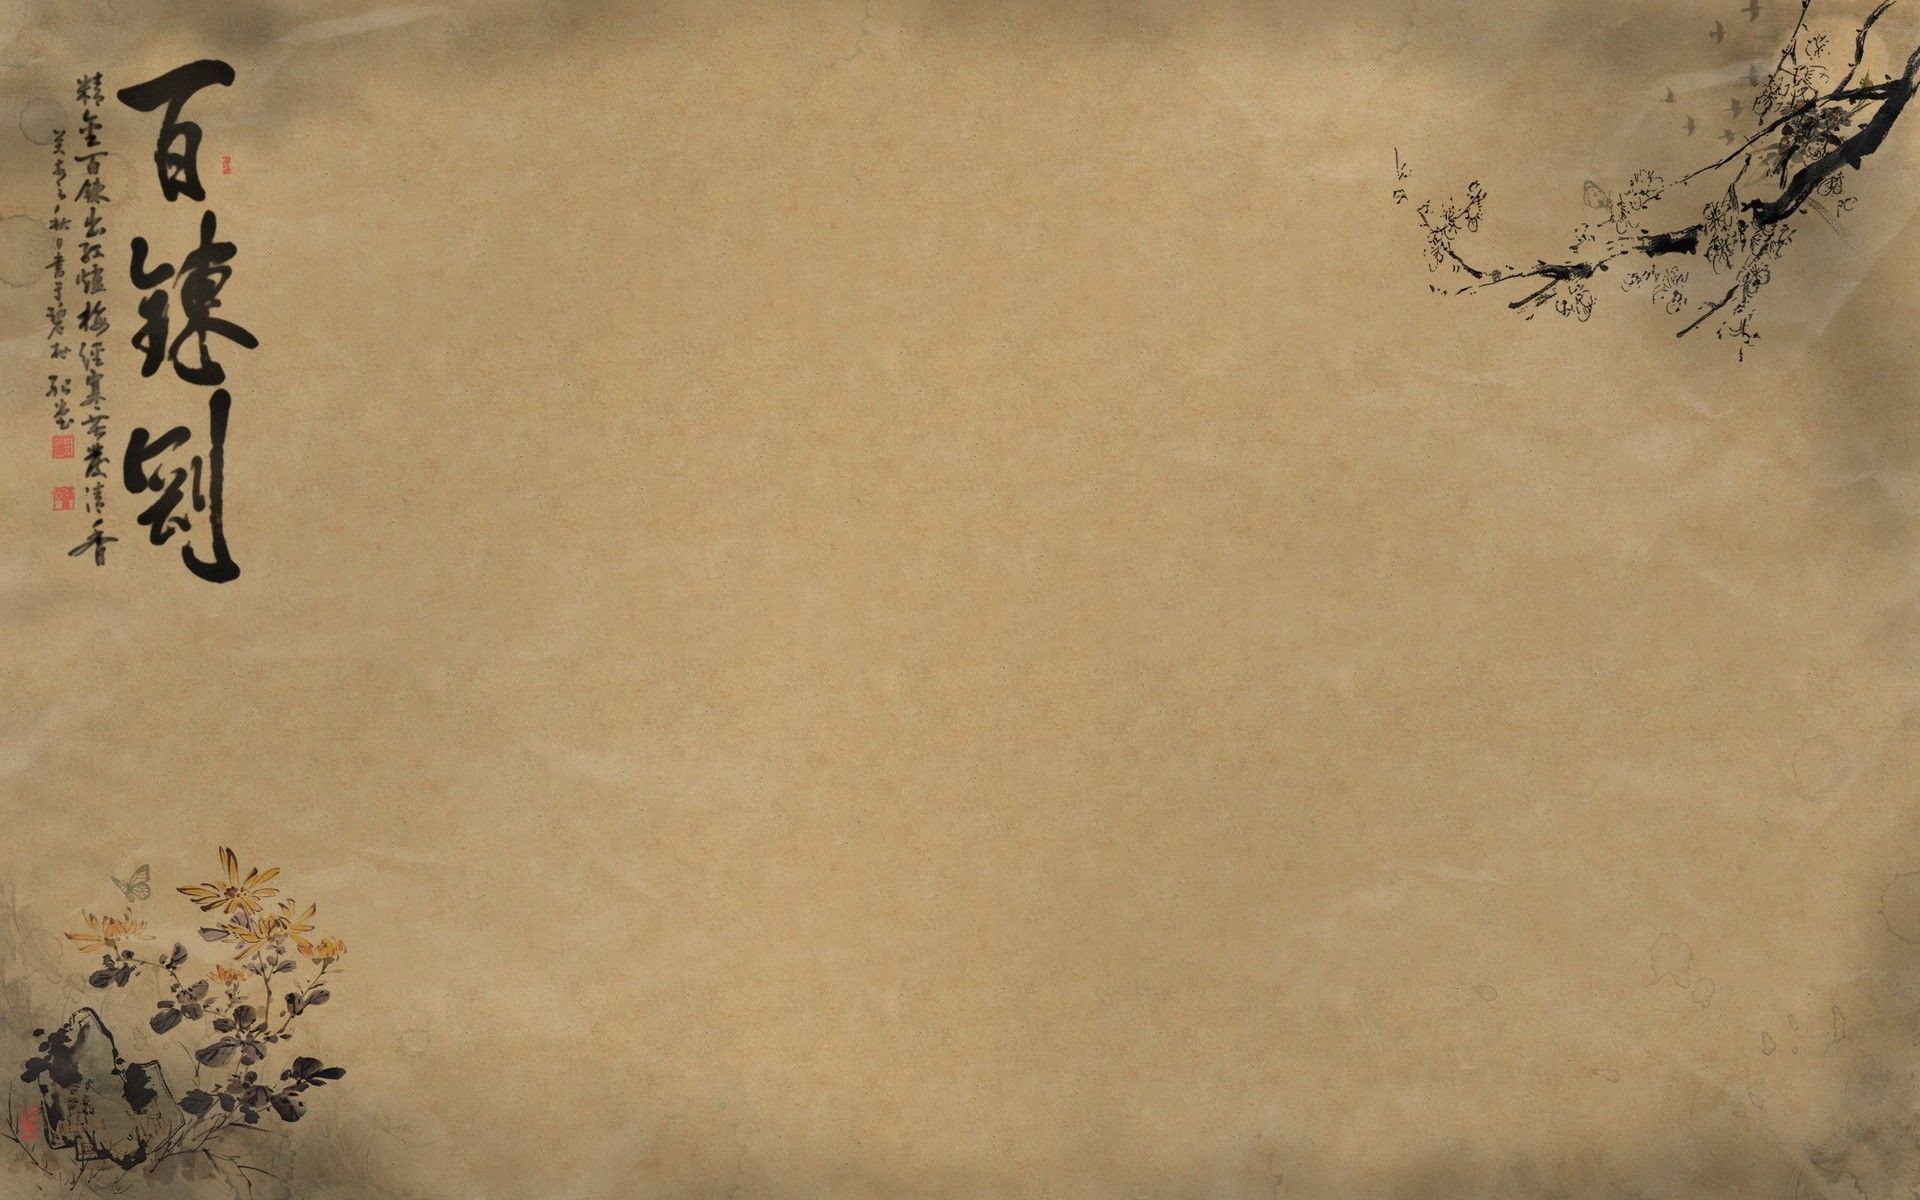 1920x1200 Chinese background Blank Template - Imgflip